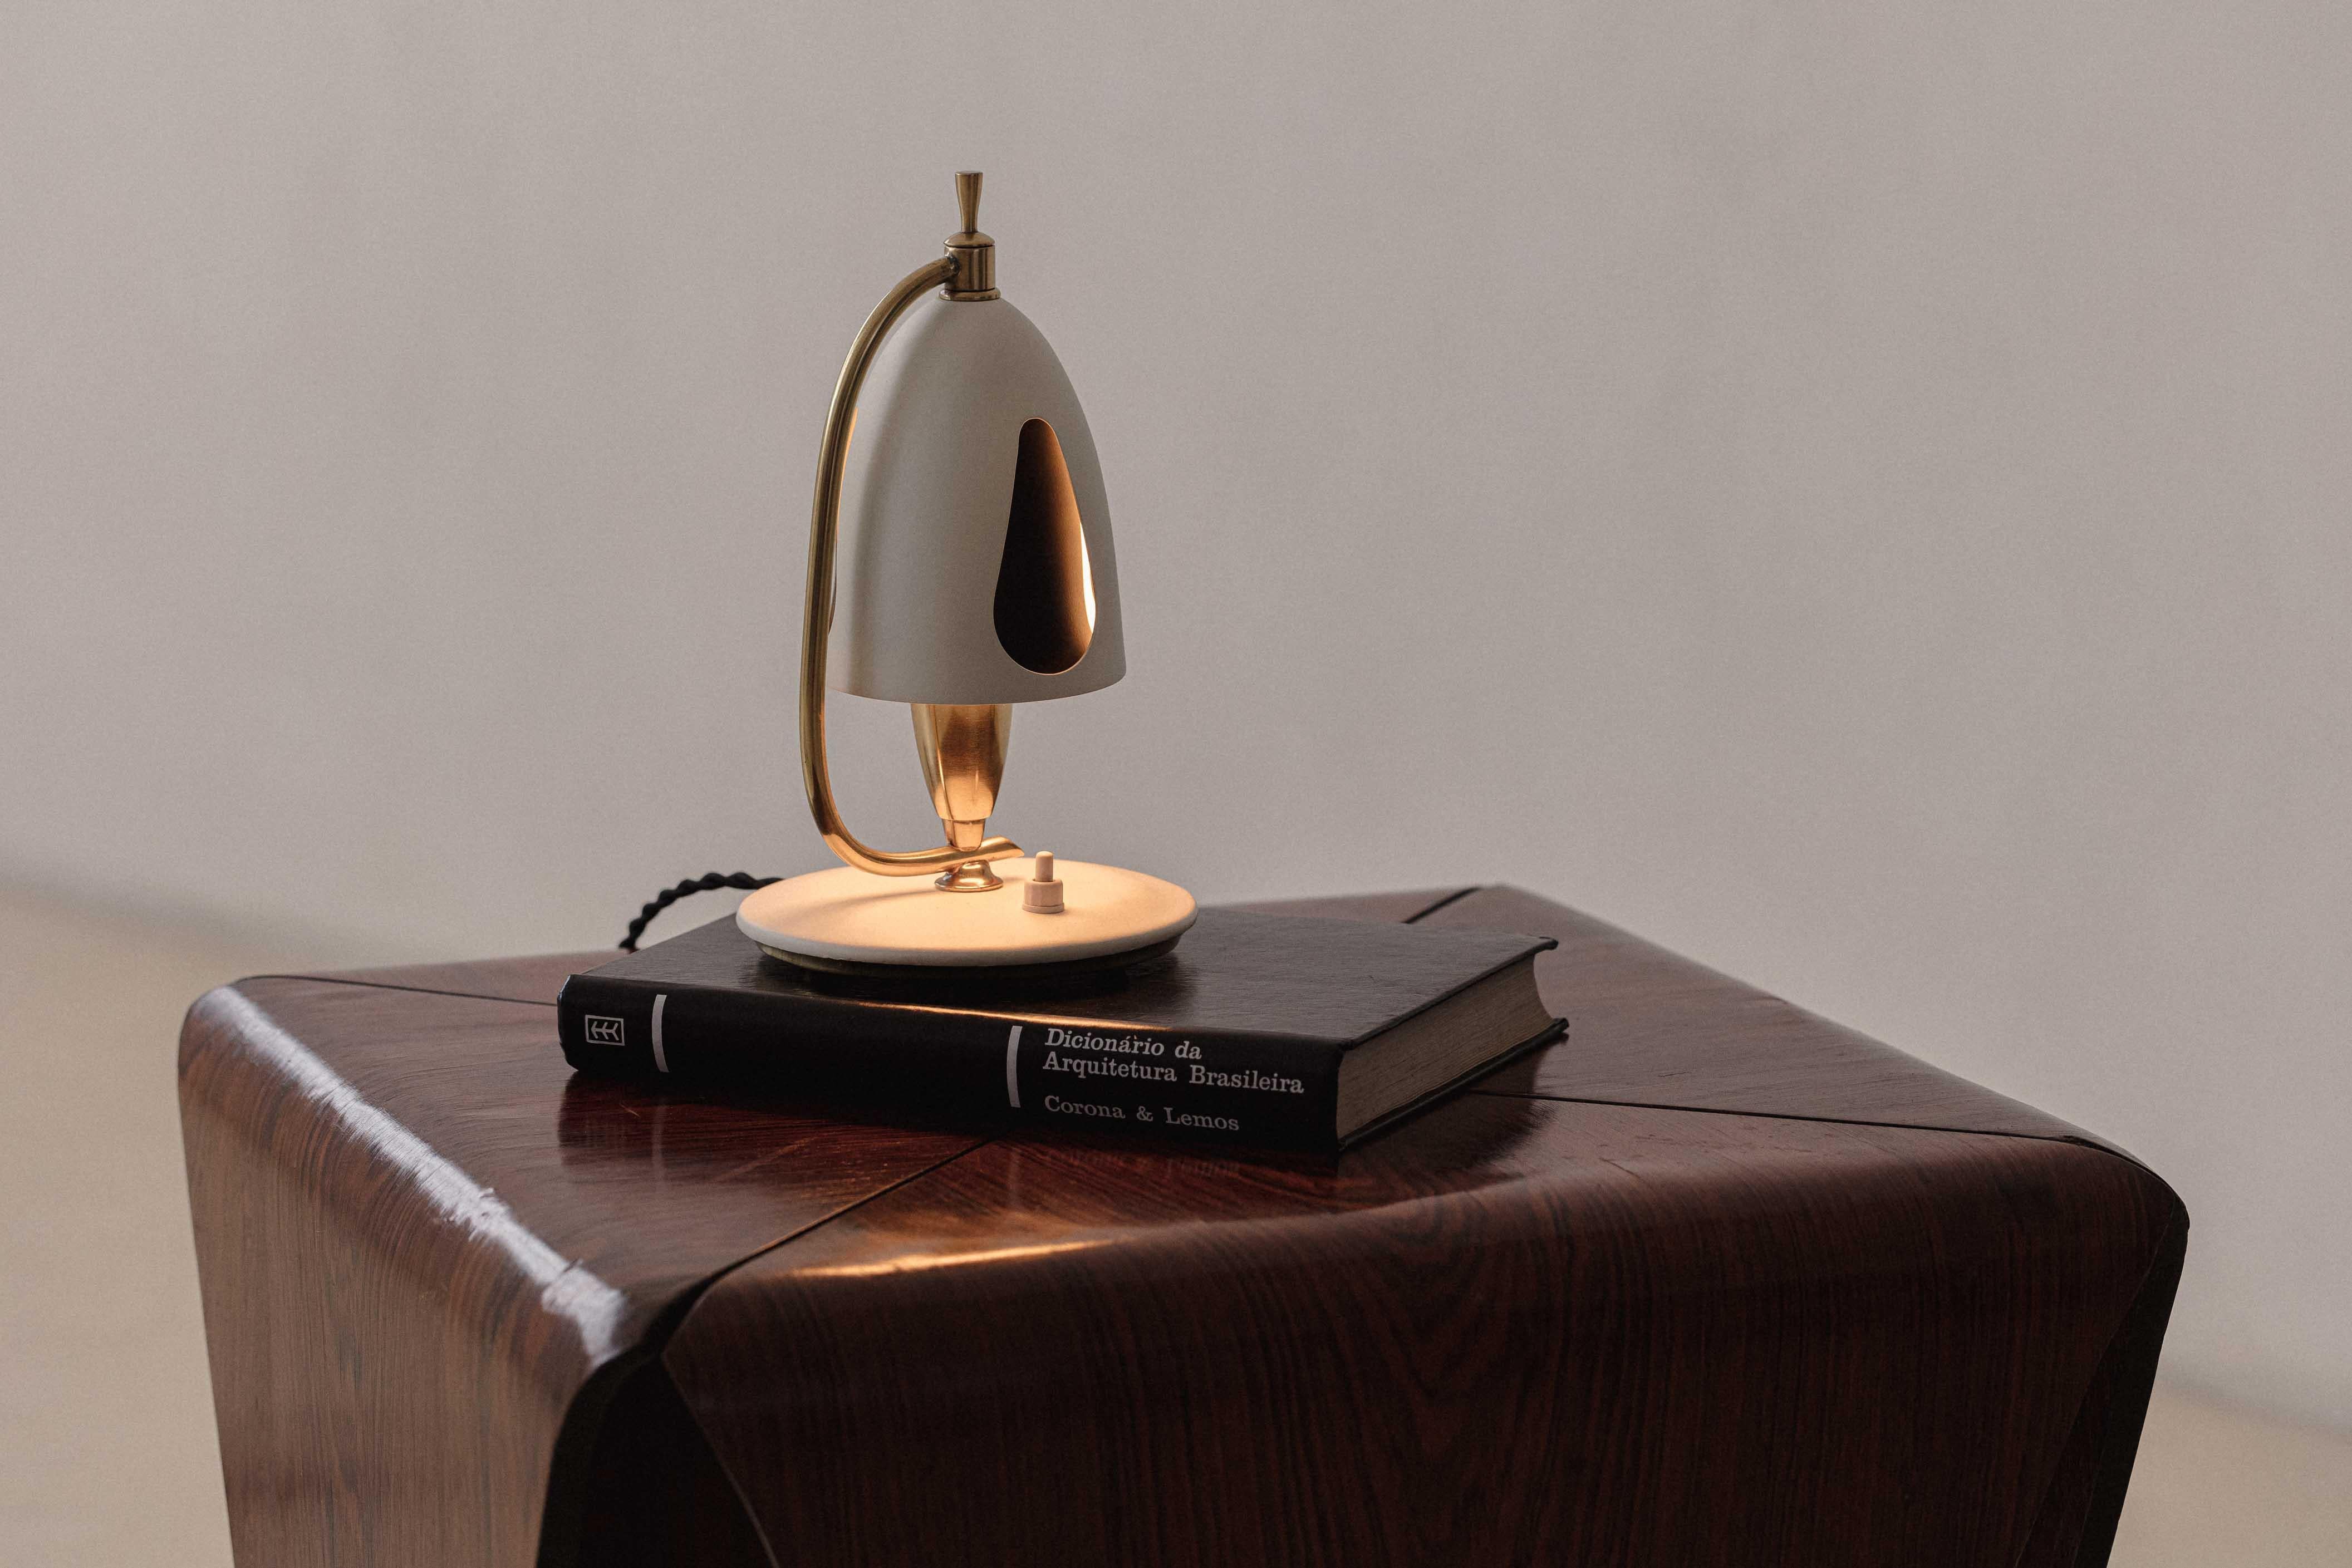 Designed in circa. 1950 and produced by the Brazilian company Carlo Montalto & Filhos, this table lamp brings a charming touch to any ambiance – whether the light is on or off.
Created by the Italian Carlo Montalto in the 1930s, Carlo Montalto